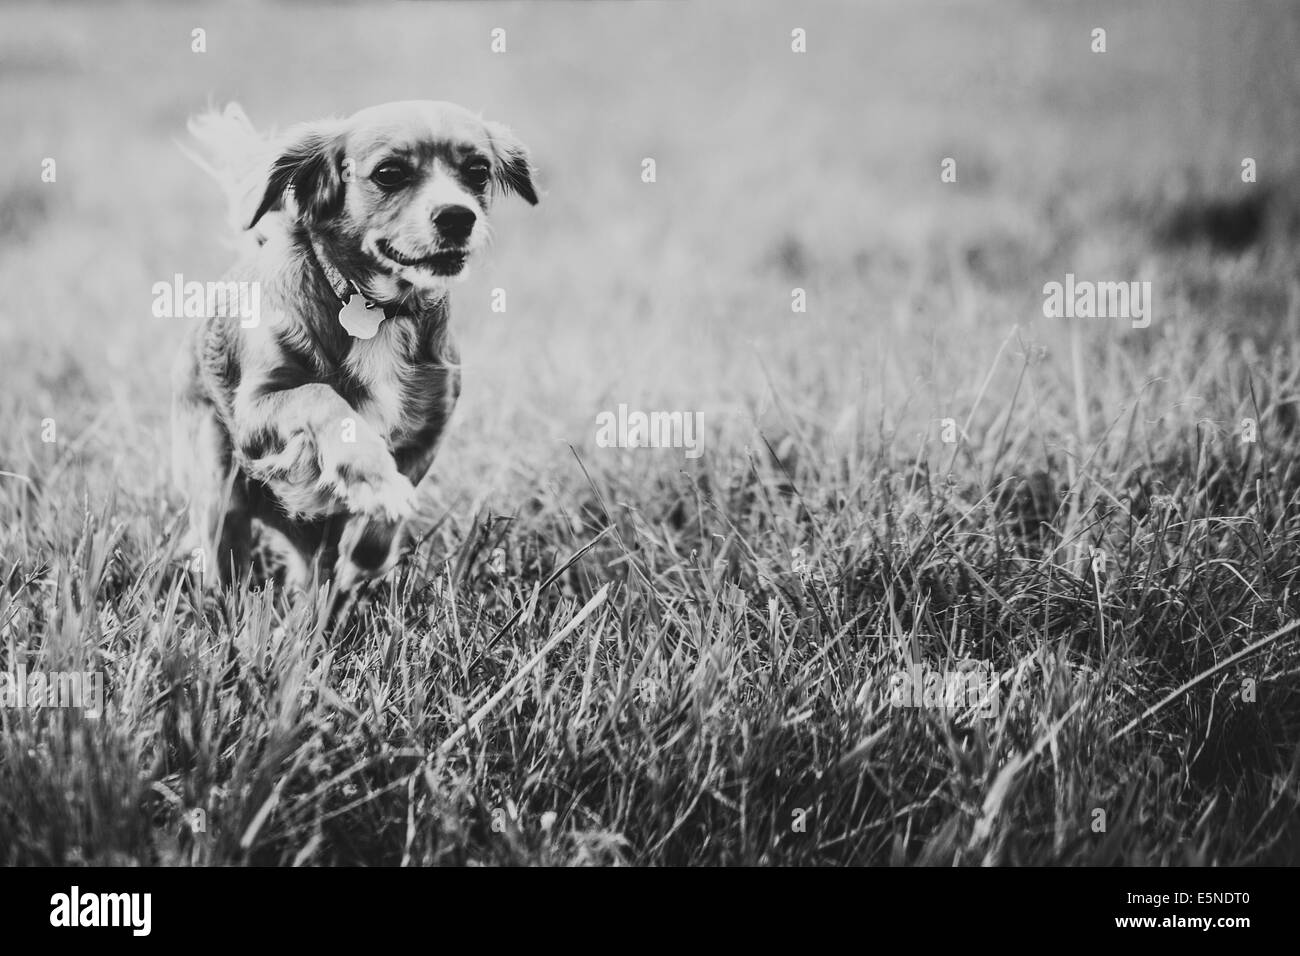 Dog grass Black and White Stock Photos & Images - Alamy